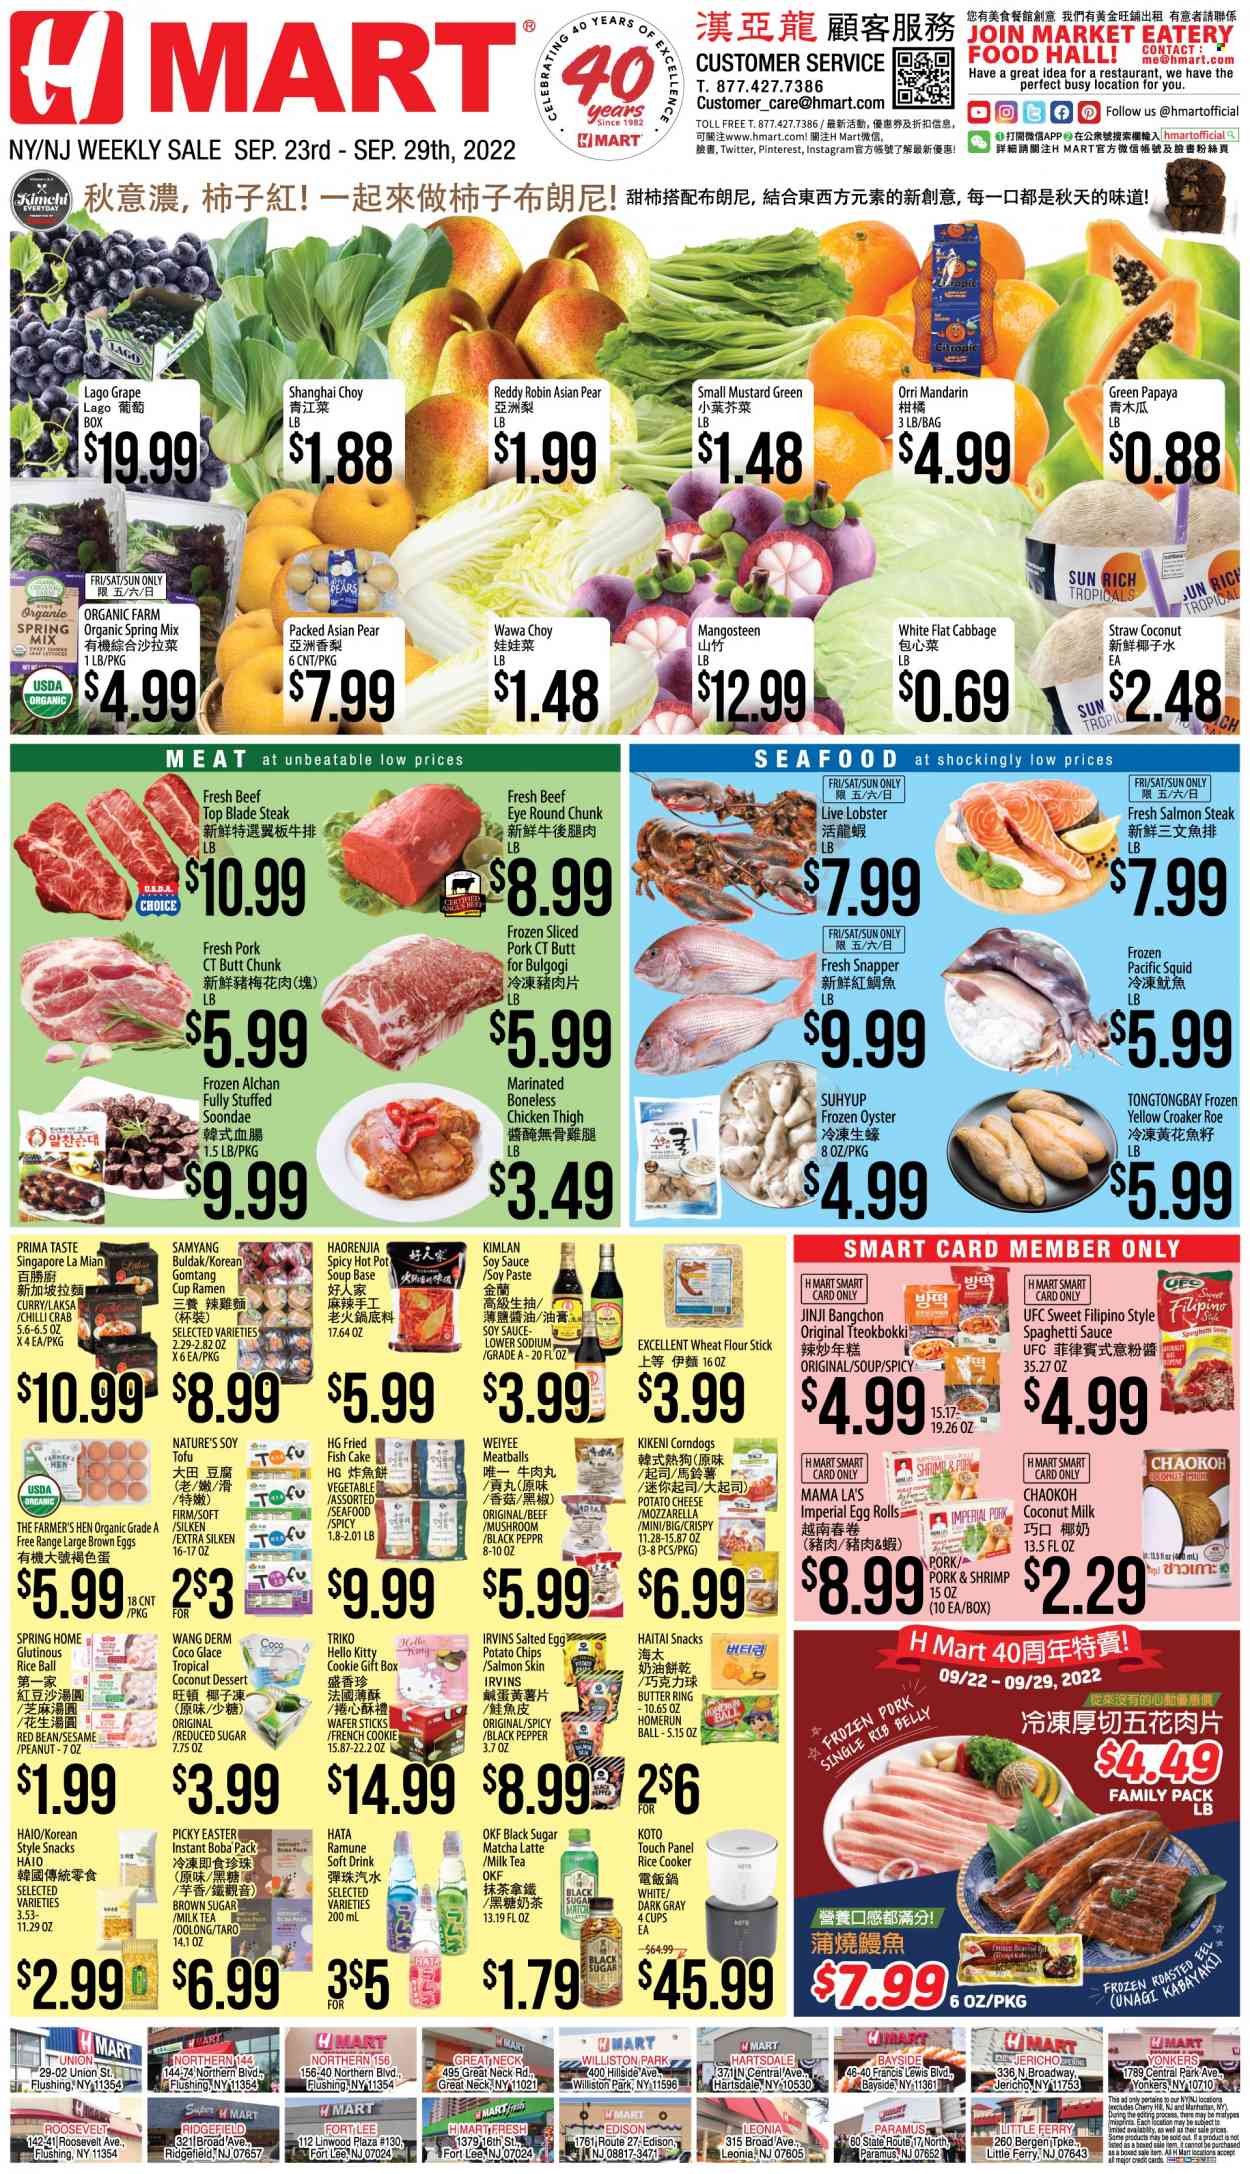 thumbnail - Hmart Flyer - 09/23/2022 - 09/29/2022 - Sales products - mushrooms, cabbage, mandarines, cherries, papaya, pears, eel, lobster, salmon, squid, oysters, seafood, fish, shrimps, fried fish, crab cake, ramen, spaghetti, meatballs, soup, sauce, egg rolls, spaghetti sauce, cheese, tofu, butter, fish cake, wafers, snack, potato chips, salted egg, cane sugar, flour, wheat flour, coconut milk, black pepper, mustard, soy sauce, soft drink, matcha, tea, rum, beef meat, steak, eye of round, top blade, bin, pot, rice cooker, cup, straw, flat cabbage. Page 1.